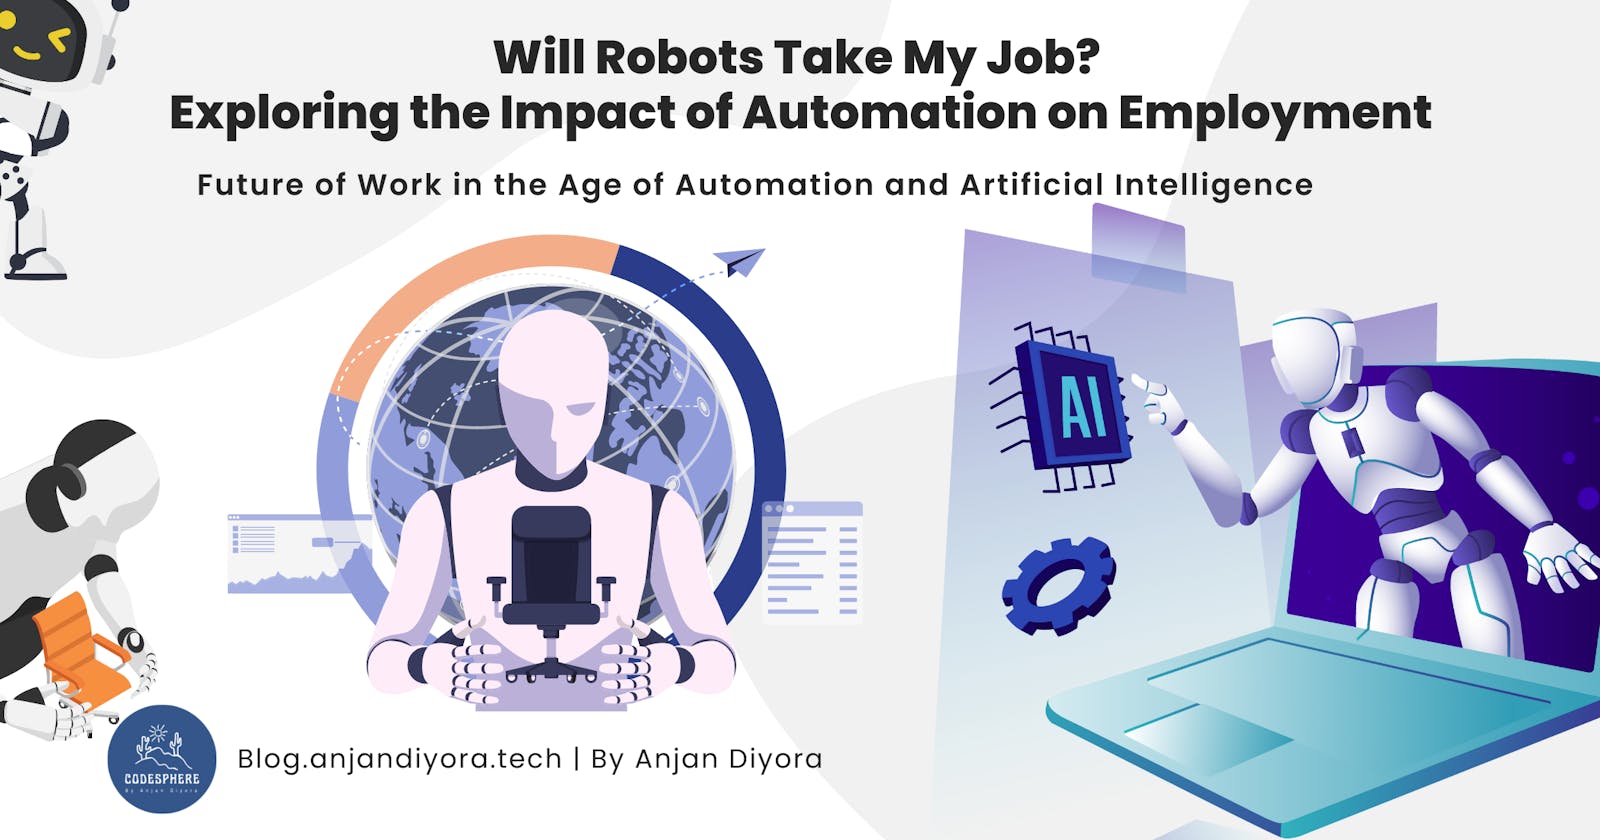 Will Robots Take My Job? Exploring the Impact of Automation on Employment